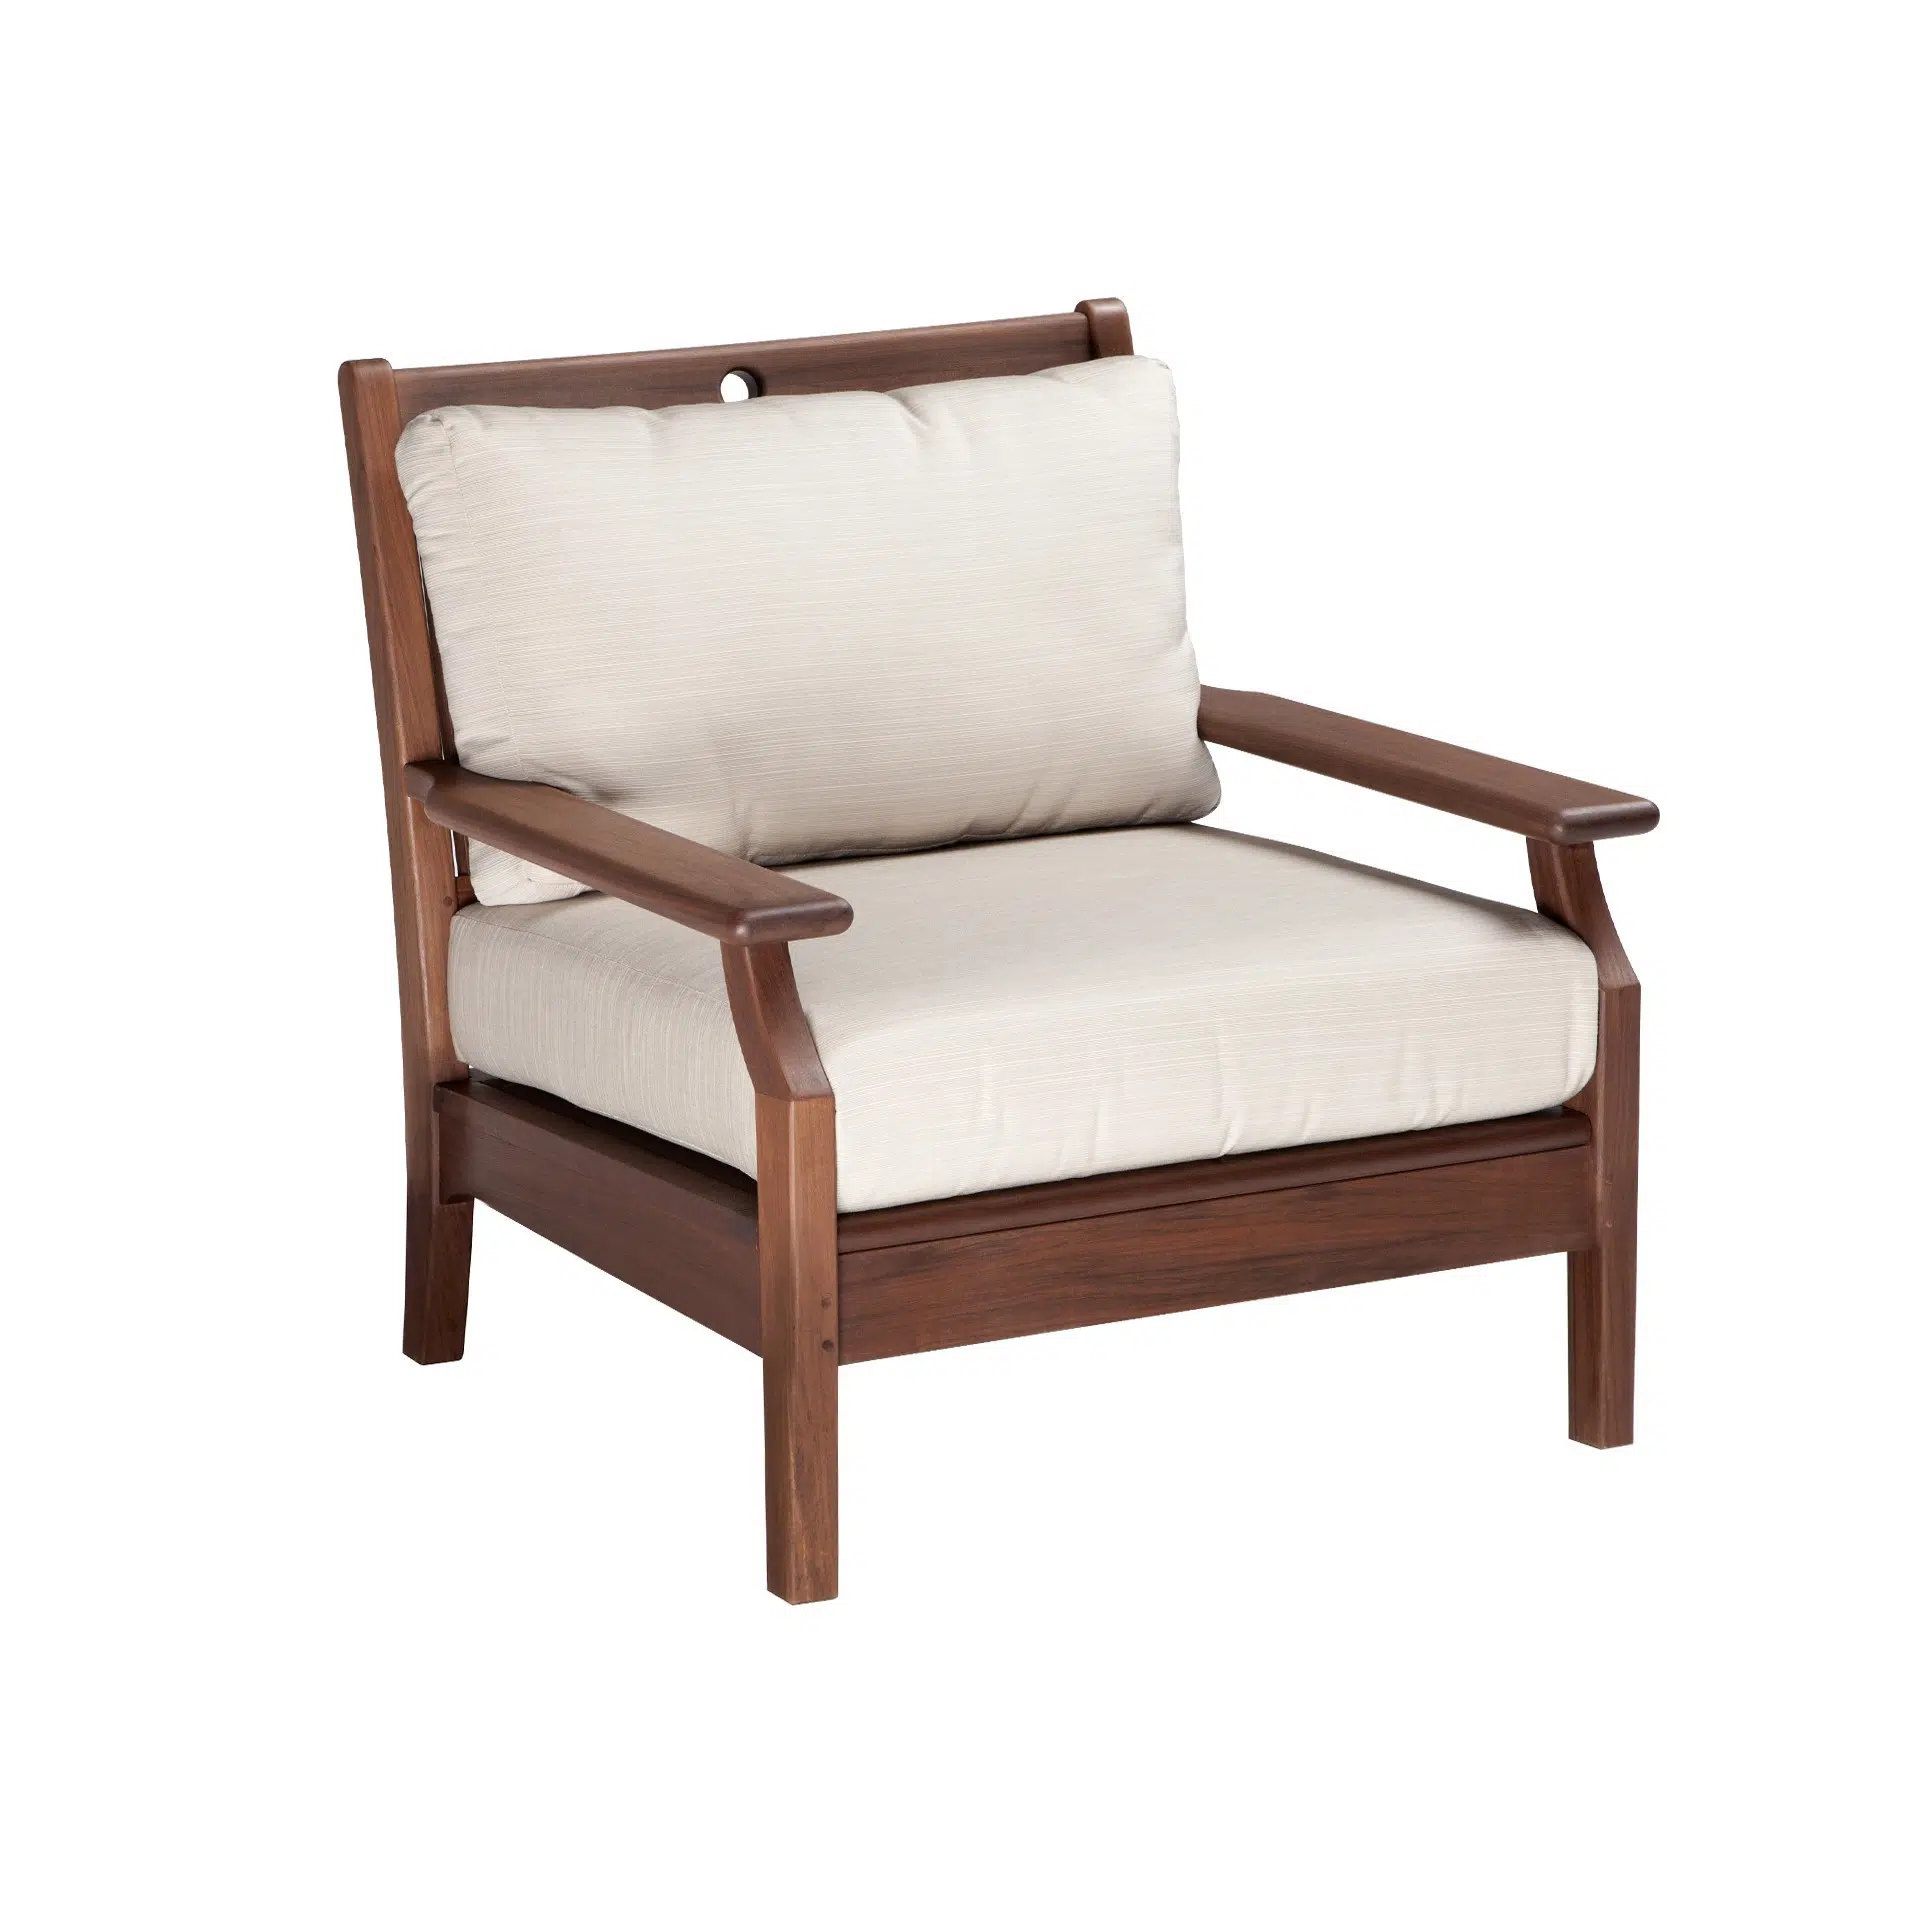 Opal loung chair from Hauser's Patio